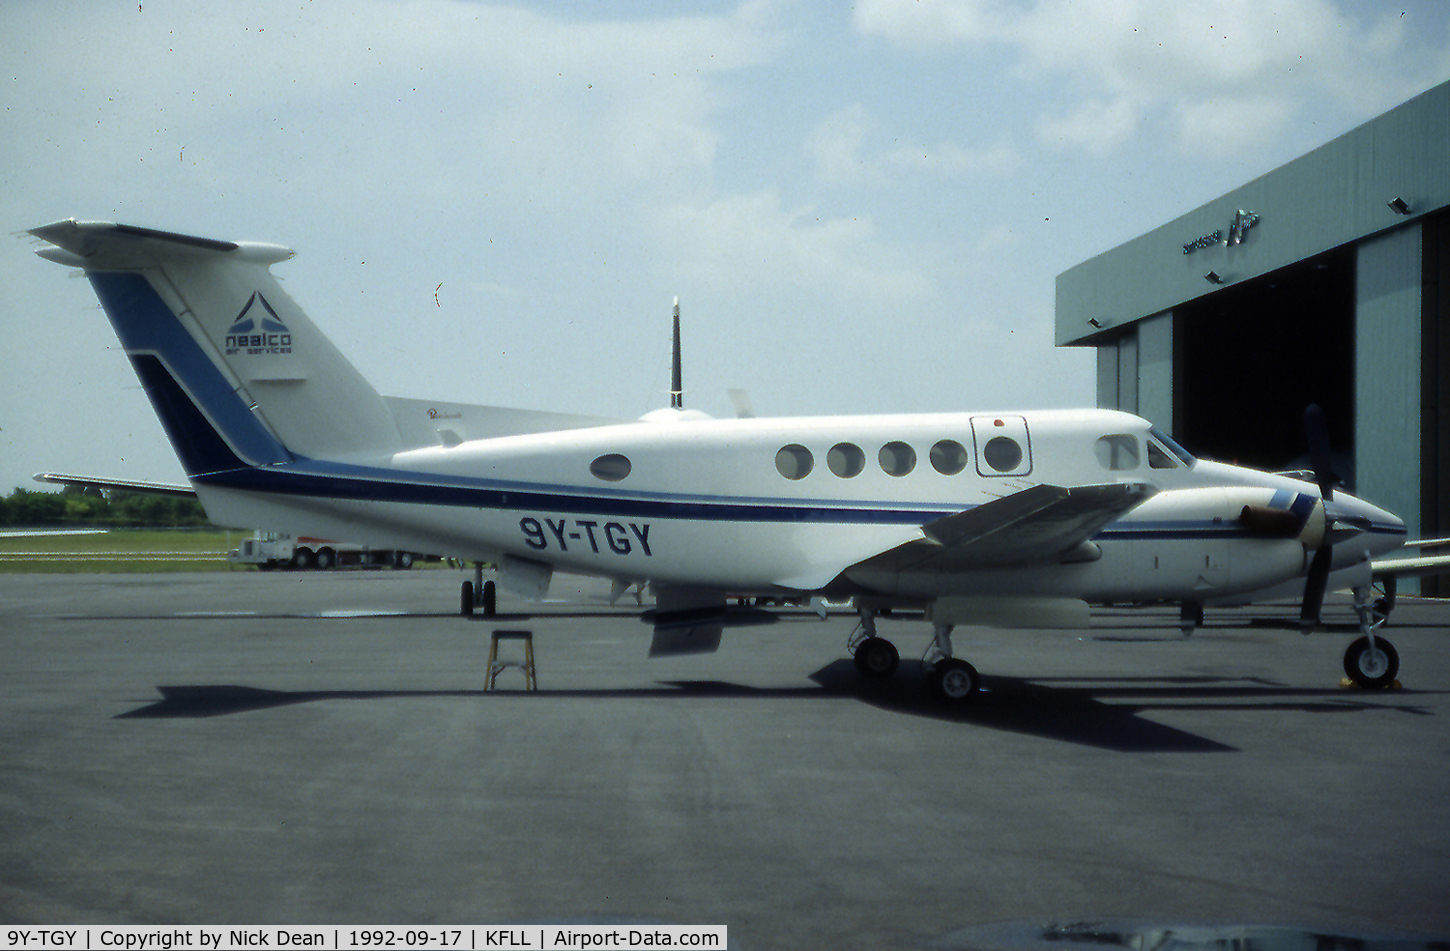 9Y-TGY, 1982 Beech 200 Super King Air C/N BB-1048, KFLL (Currently registered in the UK as G-FPLB)